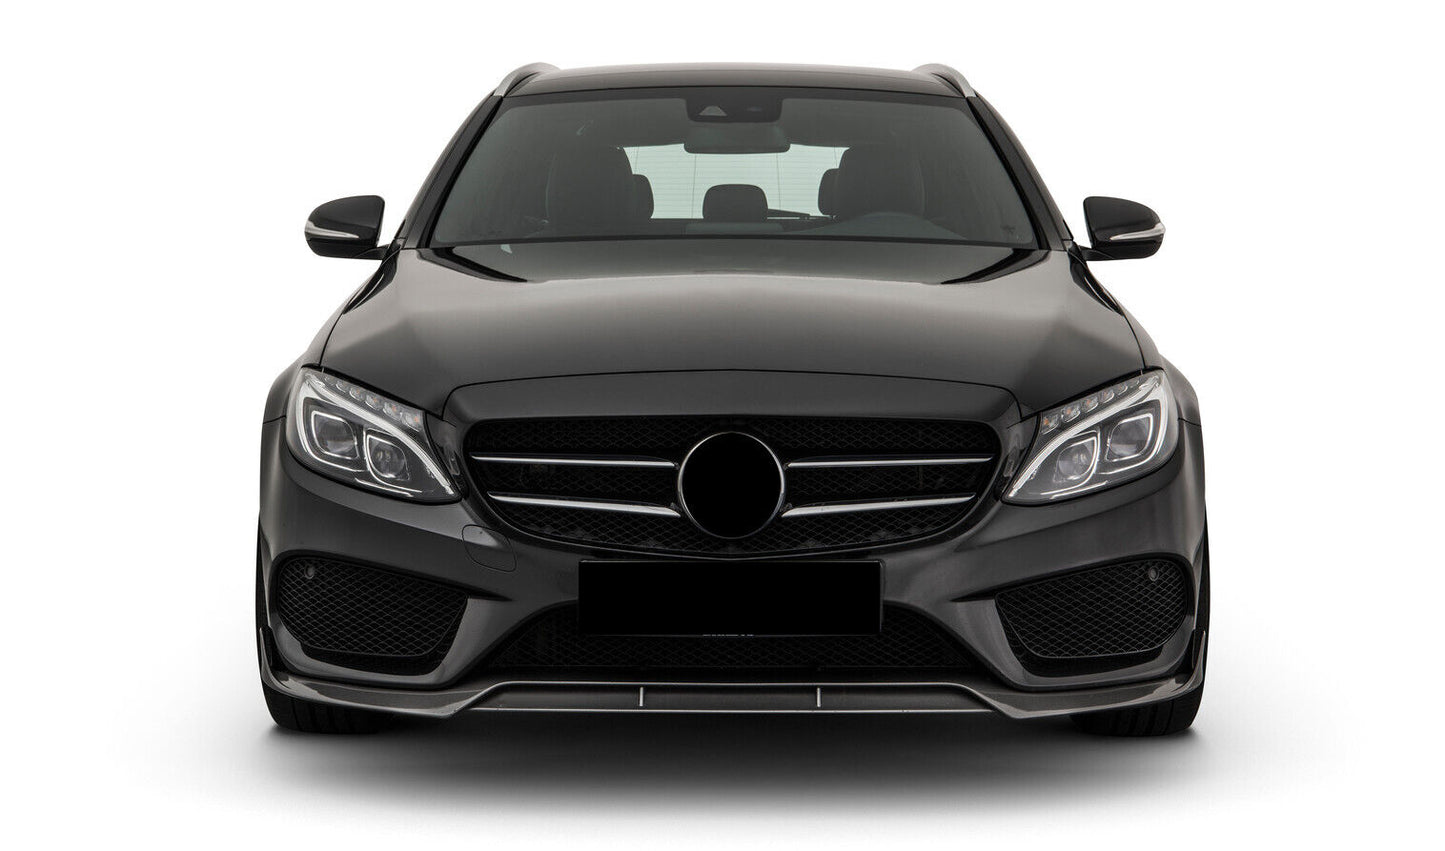 MERCEDES C CLASS W205 A205 C205 AMG LOOK BRABUS STYLE FRONT SPLITTER LIP 2013-17